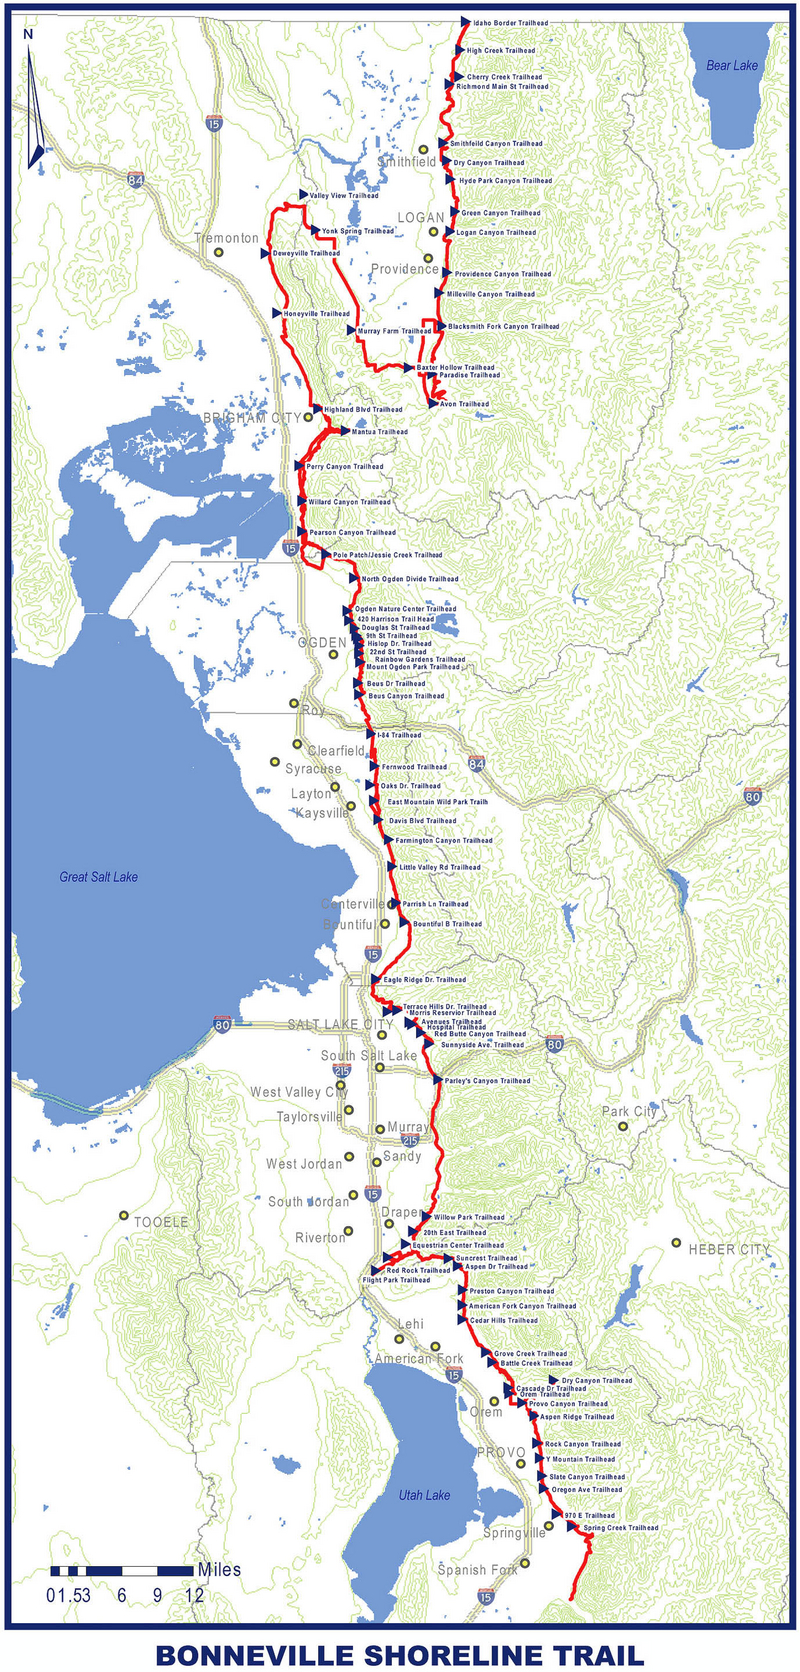 "Full map of the proposed Bonneville Shoreline Trail"